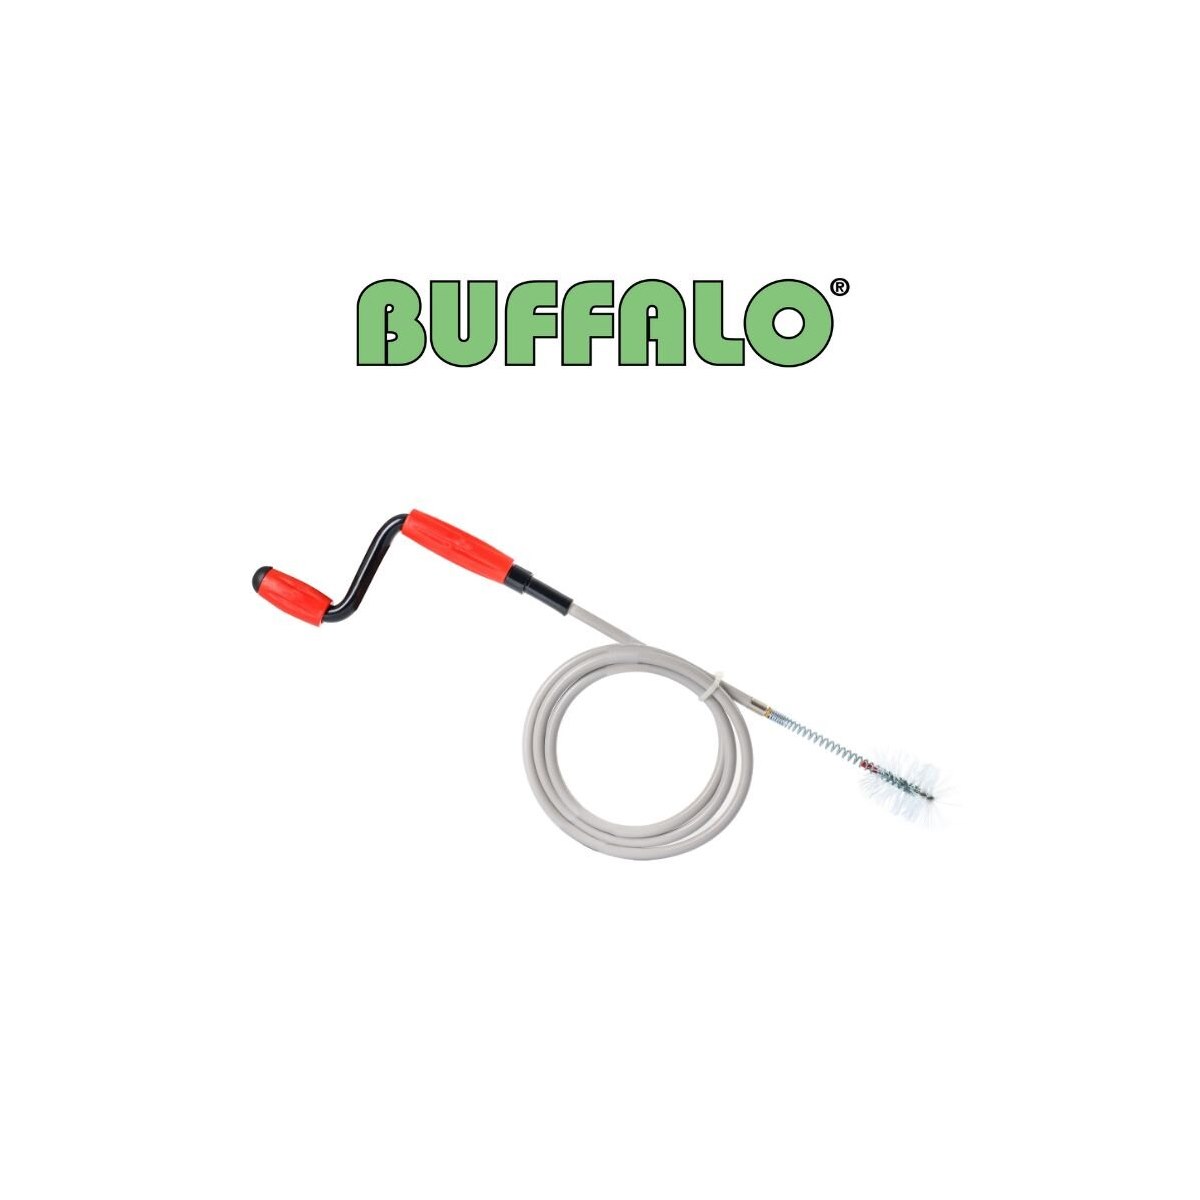 How to use Buffalo Drain Cleaning Coil 1.5m 5in